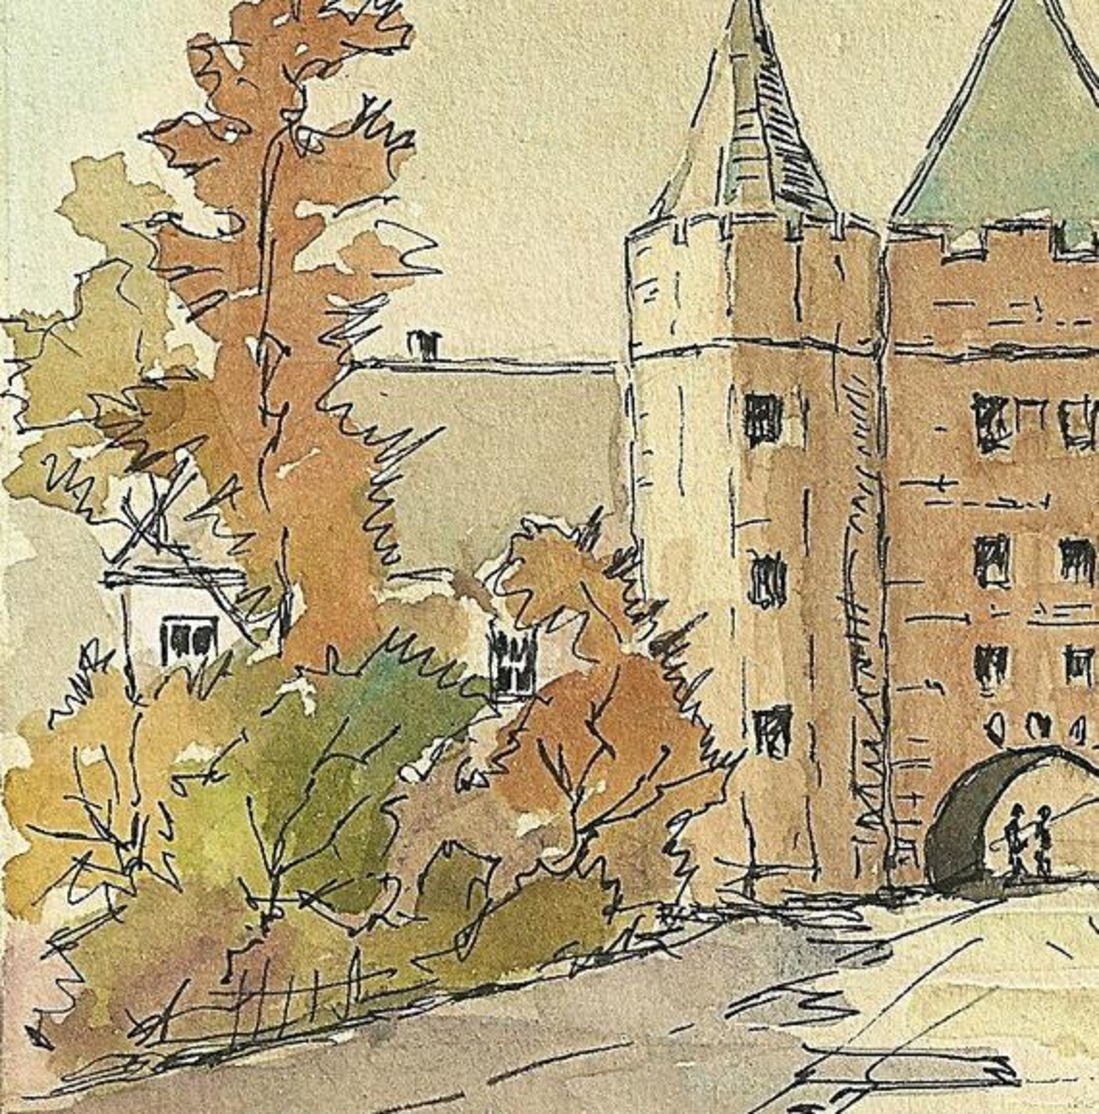 Watercolour Landscape Painting, Pen & Ink Drawings Of An Old Castle Tower Fort Gateway, Signed & Dated 1962. - Watercolours